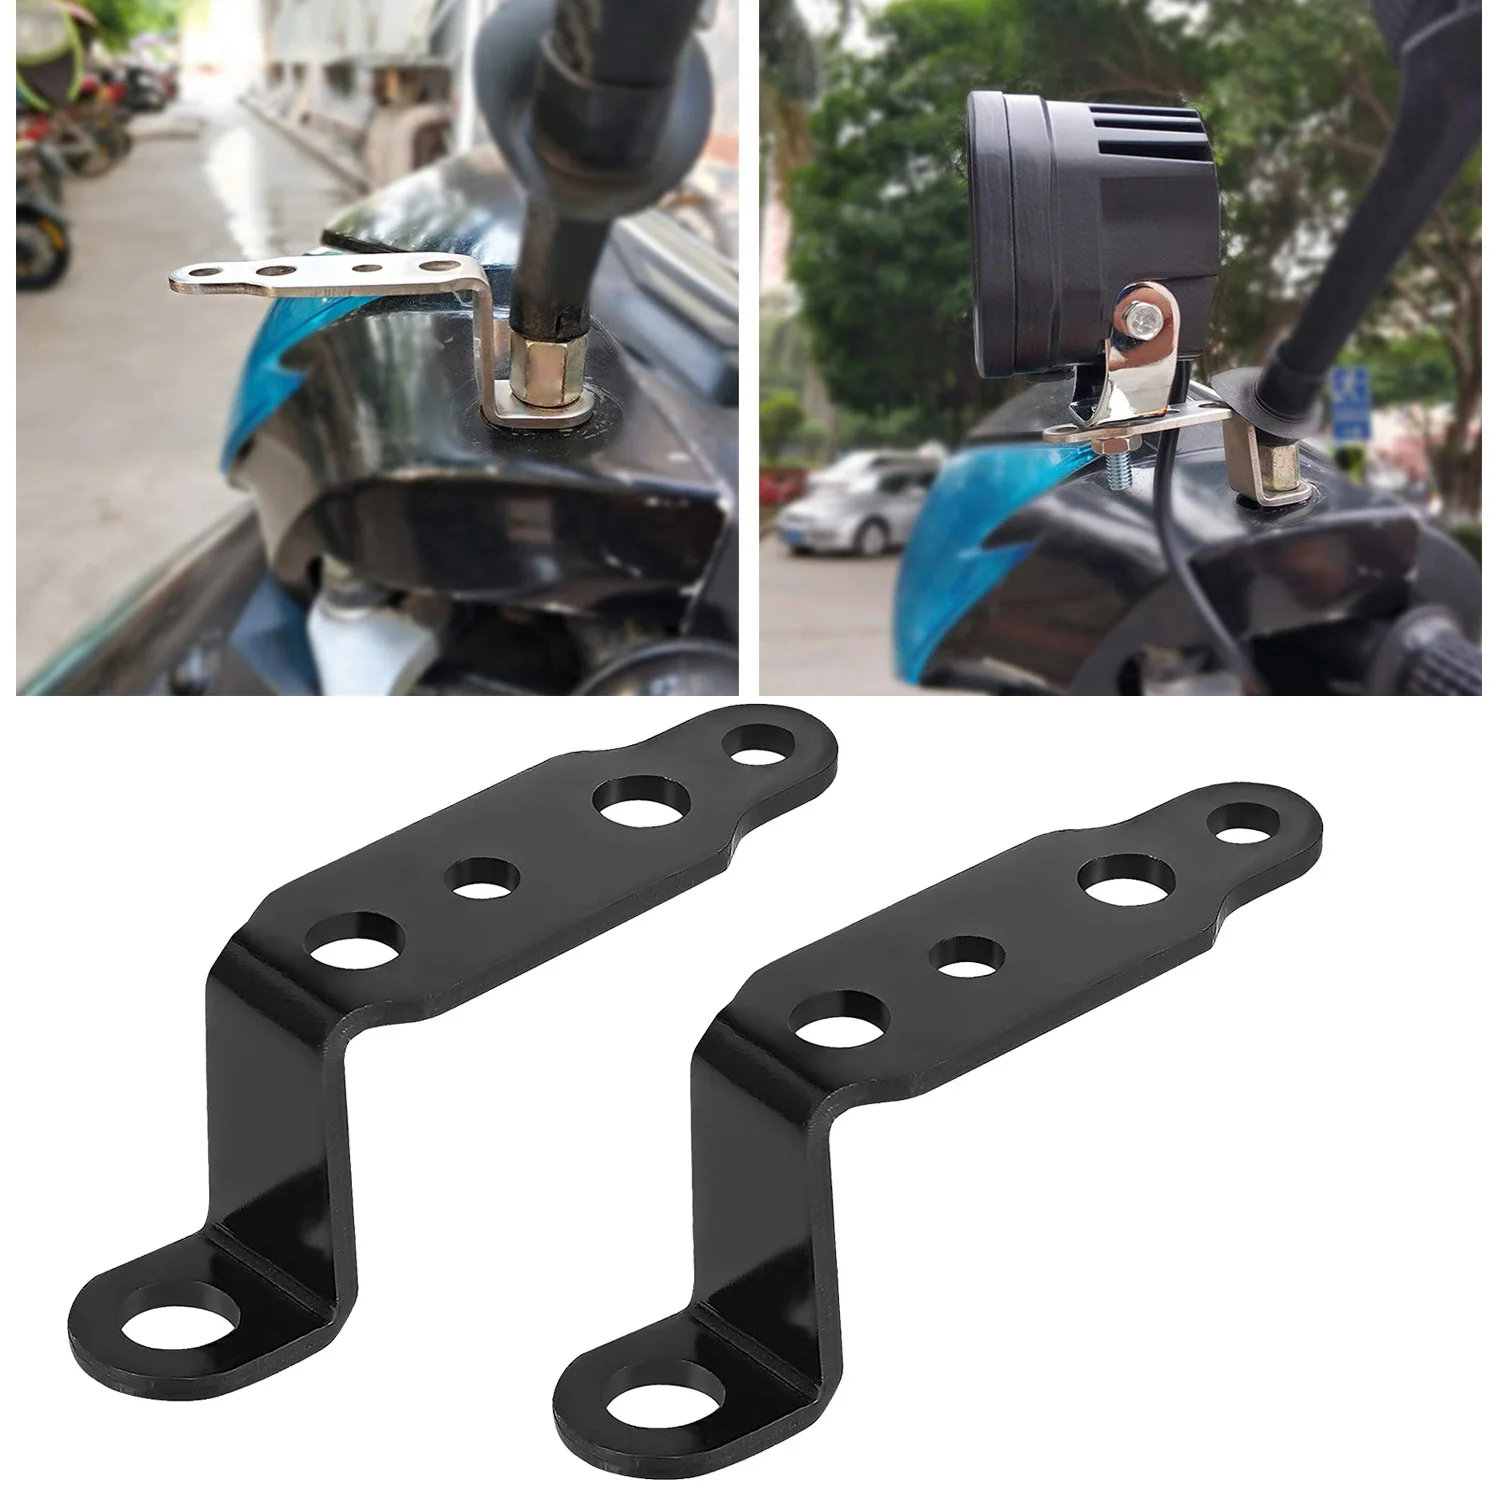 Motorcycle LED Headlight Bracket Rearview Mirror Lamp Spotlight Extension Holder Clamp Motorbike Scooter Accessories